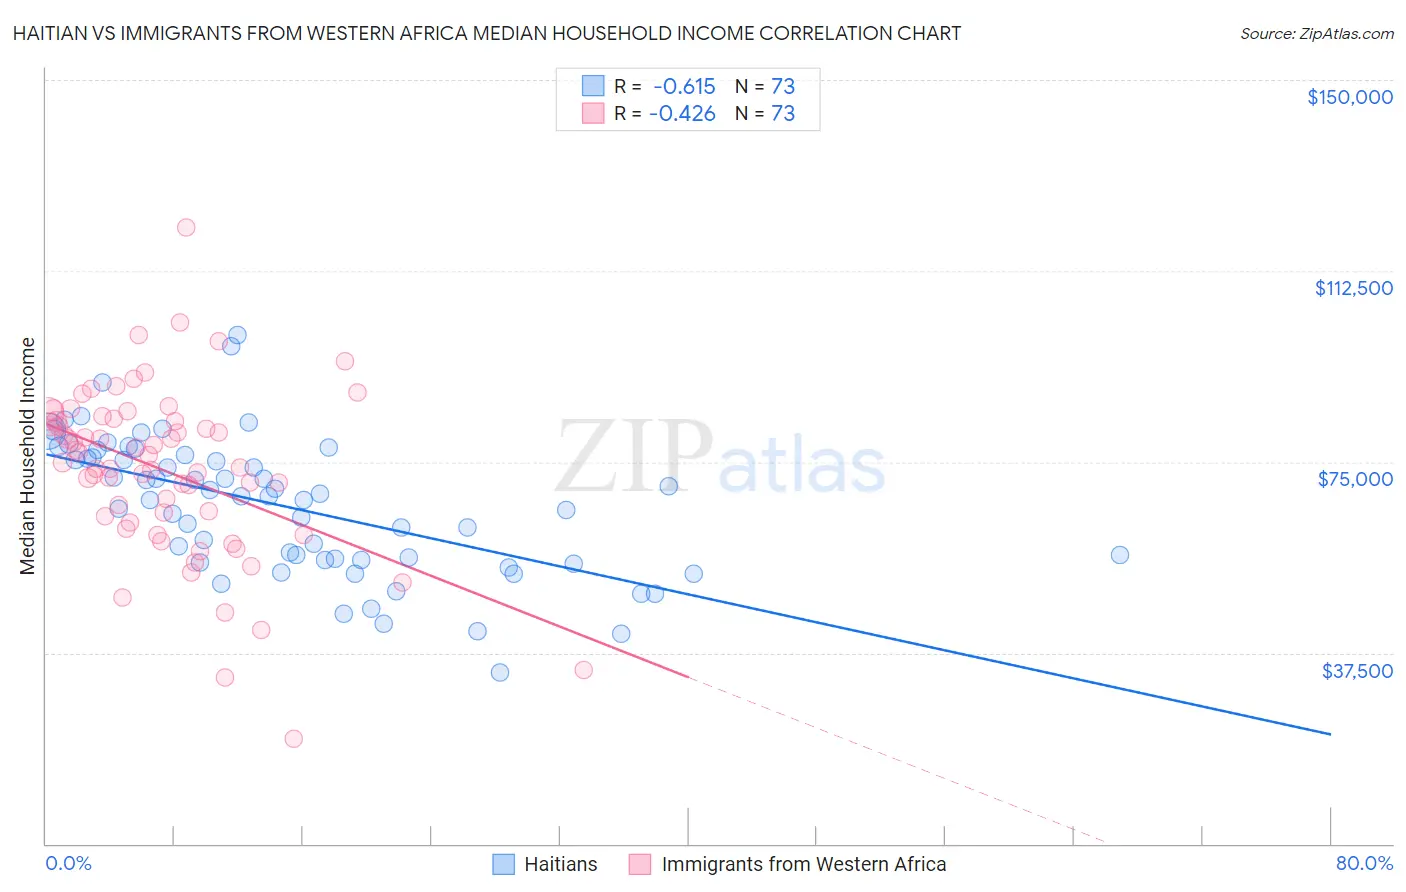 Haitian vs Immigrants from Western Africa Median Household Income